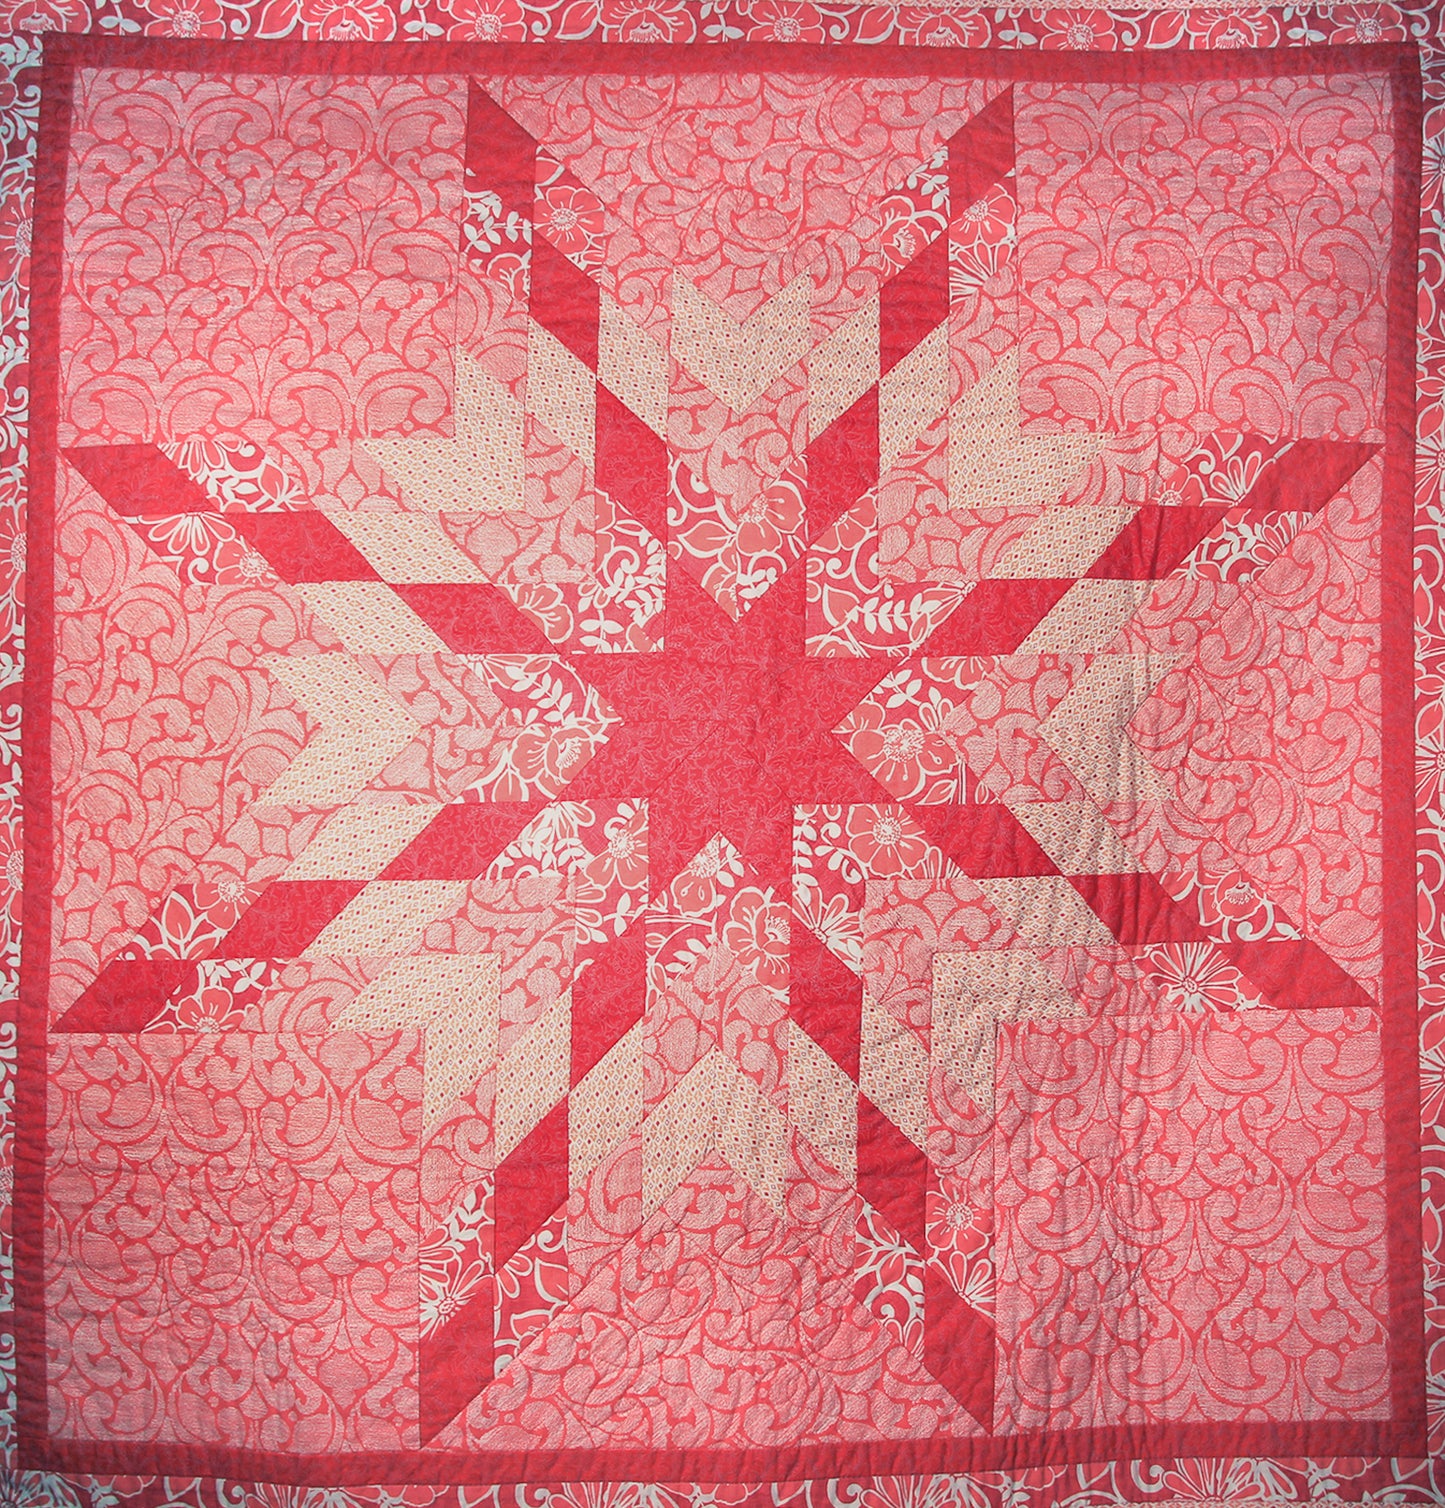 White and Red Quilt